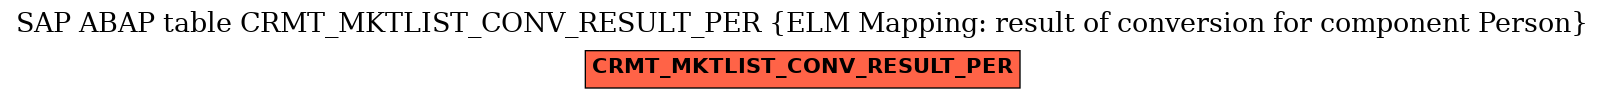 E-R Diagram for table CRMT_MKTLIST_CONV_RESULT_PER (ELM Mapping: result of conversion for component Person)